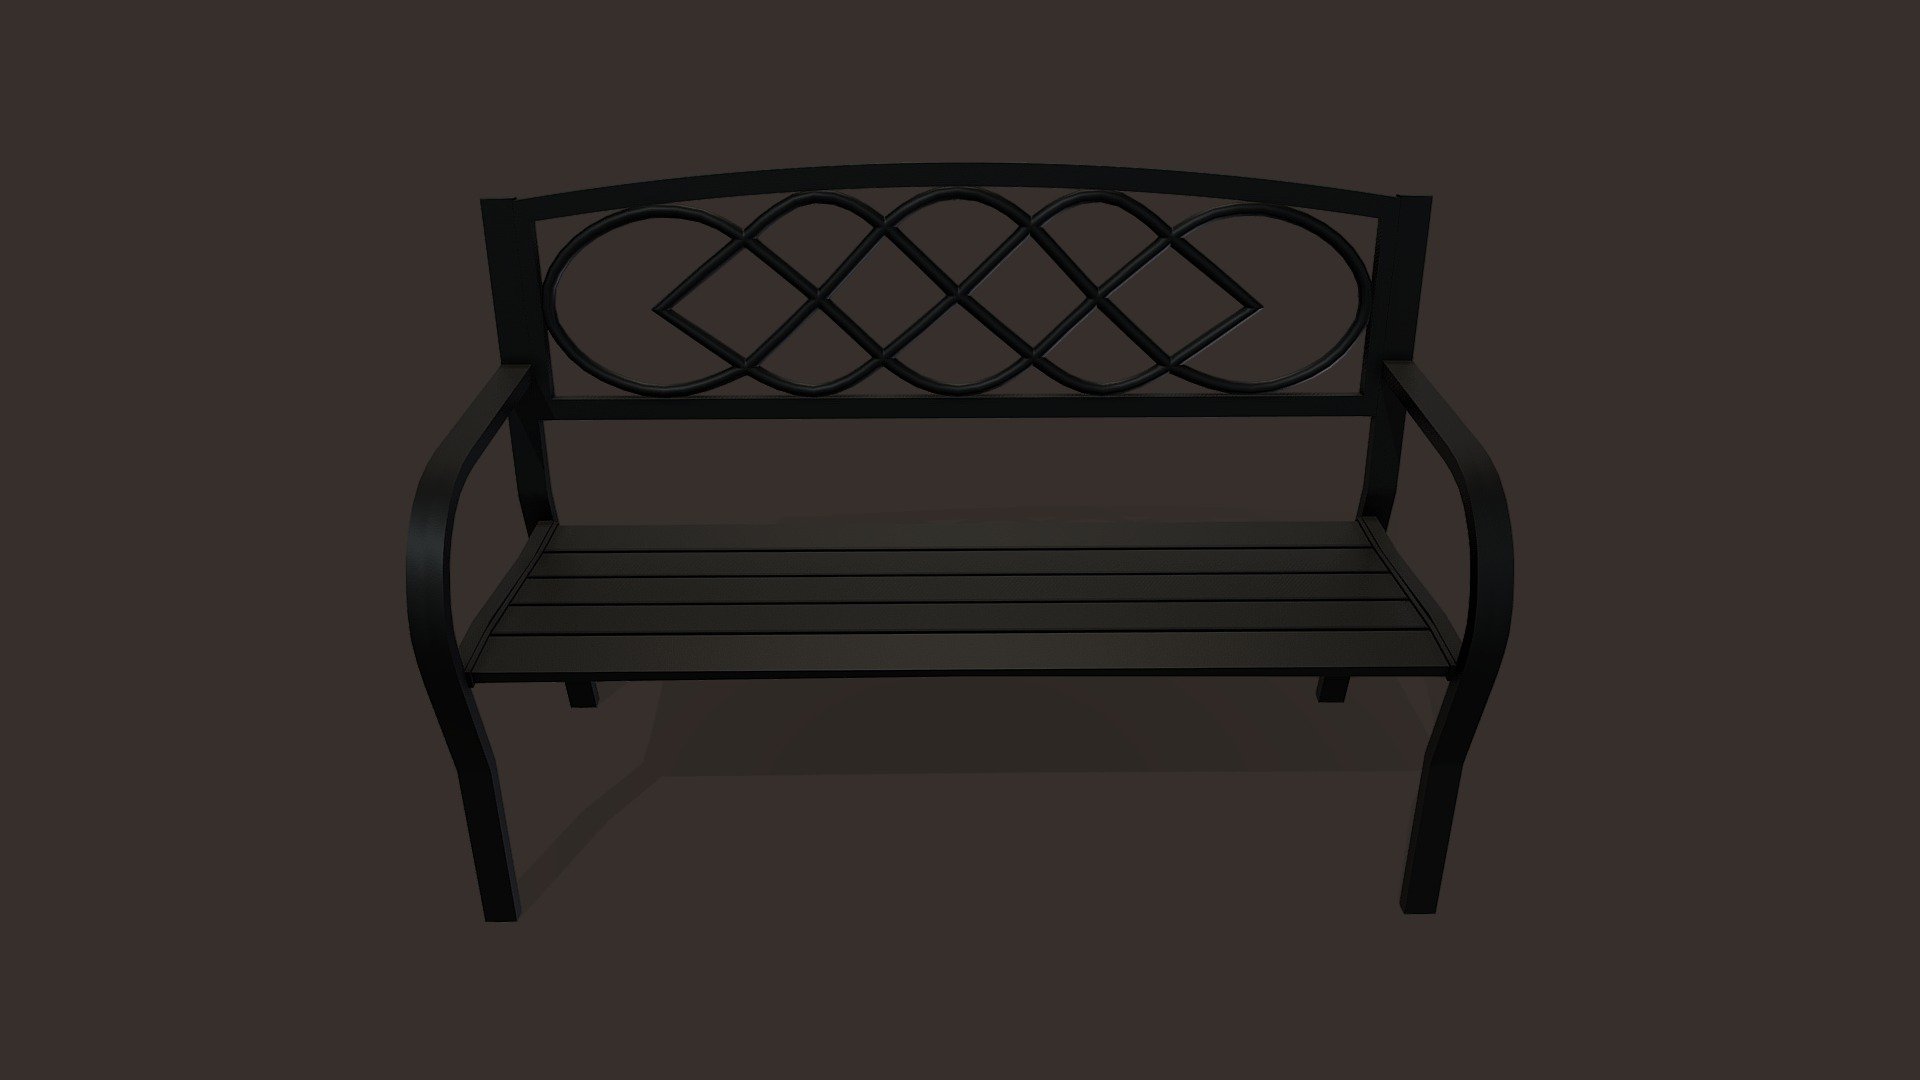 Metallic Bench is a model that will enhance detail and realism to any of your rendering projects. The model has a fully textured, detailed design that allows for close-up renders, and was originally modeled in Blender 3.5, Textured in Substance Painter 2023 and rendered with Adobe Stagier Renders have no post-processing.

Features: -High-quality polygonal model, correctly scaled for an accurate representation of the original object. -The model’s resolutions are optimized for polygon efficiency. -The model is fully textured with all materials applied. -All textures and materials are included and mapped in every format. -No cleaning up necessary just drop your models into the scene and start rendering. -No special plugin needed to open scene.

Measurements: Units: M

File Formats: OBJ FBX

Textures Formats: PNG 4k - Metallic Bench - Buy Royalty Free 3D model by MDgraphicLAB 3d model